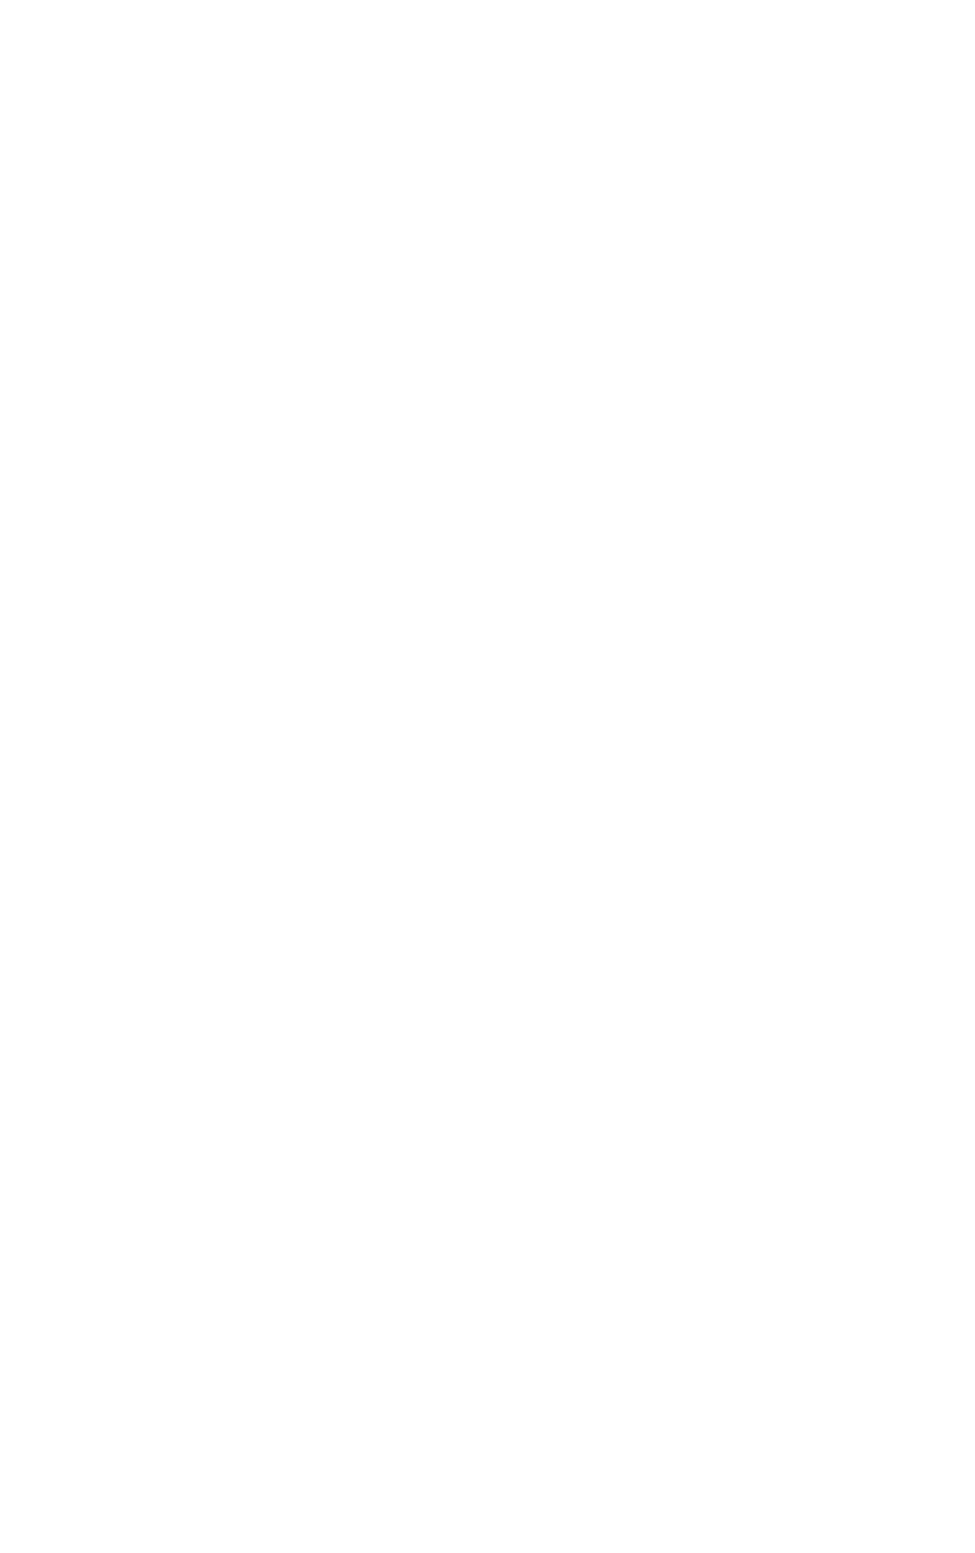 Ohmyhome logo for dark backgrounds (transparent PNG)